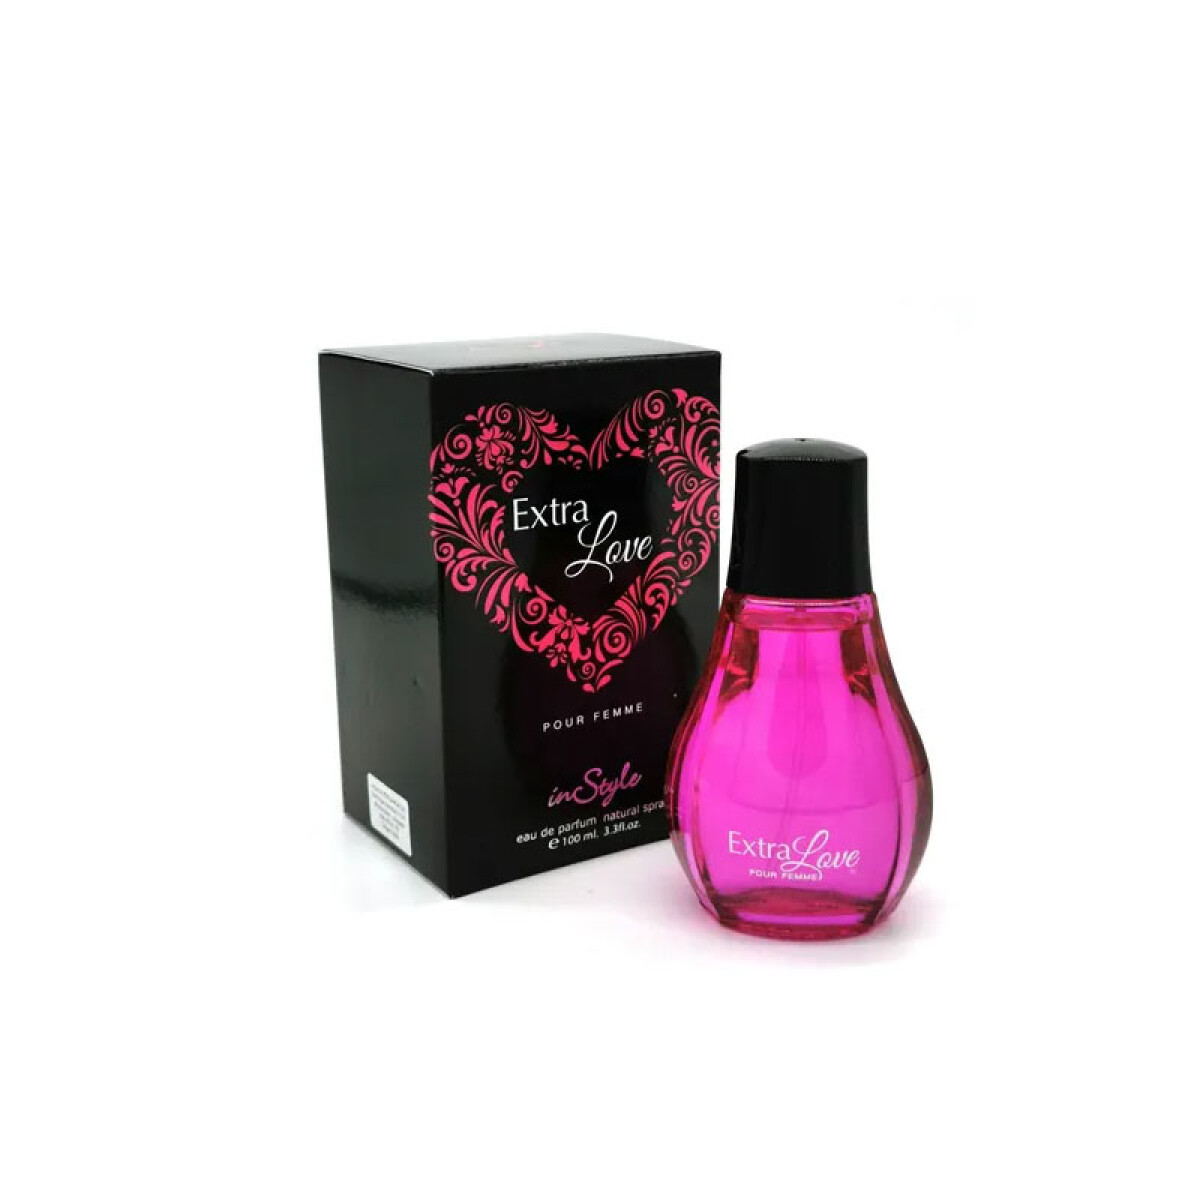 Perfume IN STYLE para mujer - Extra Love 